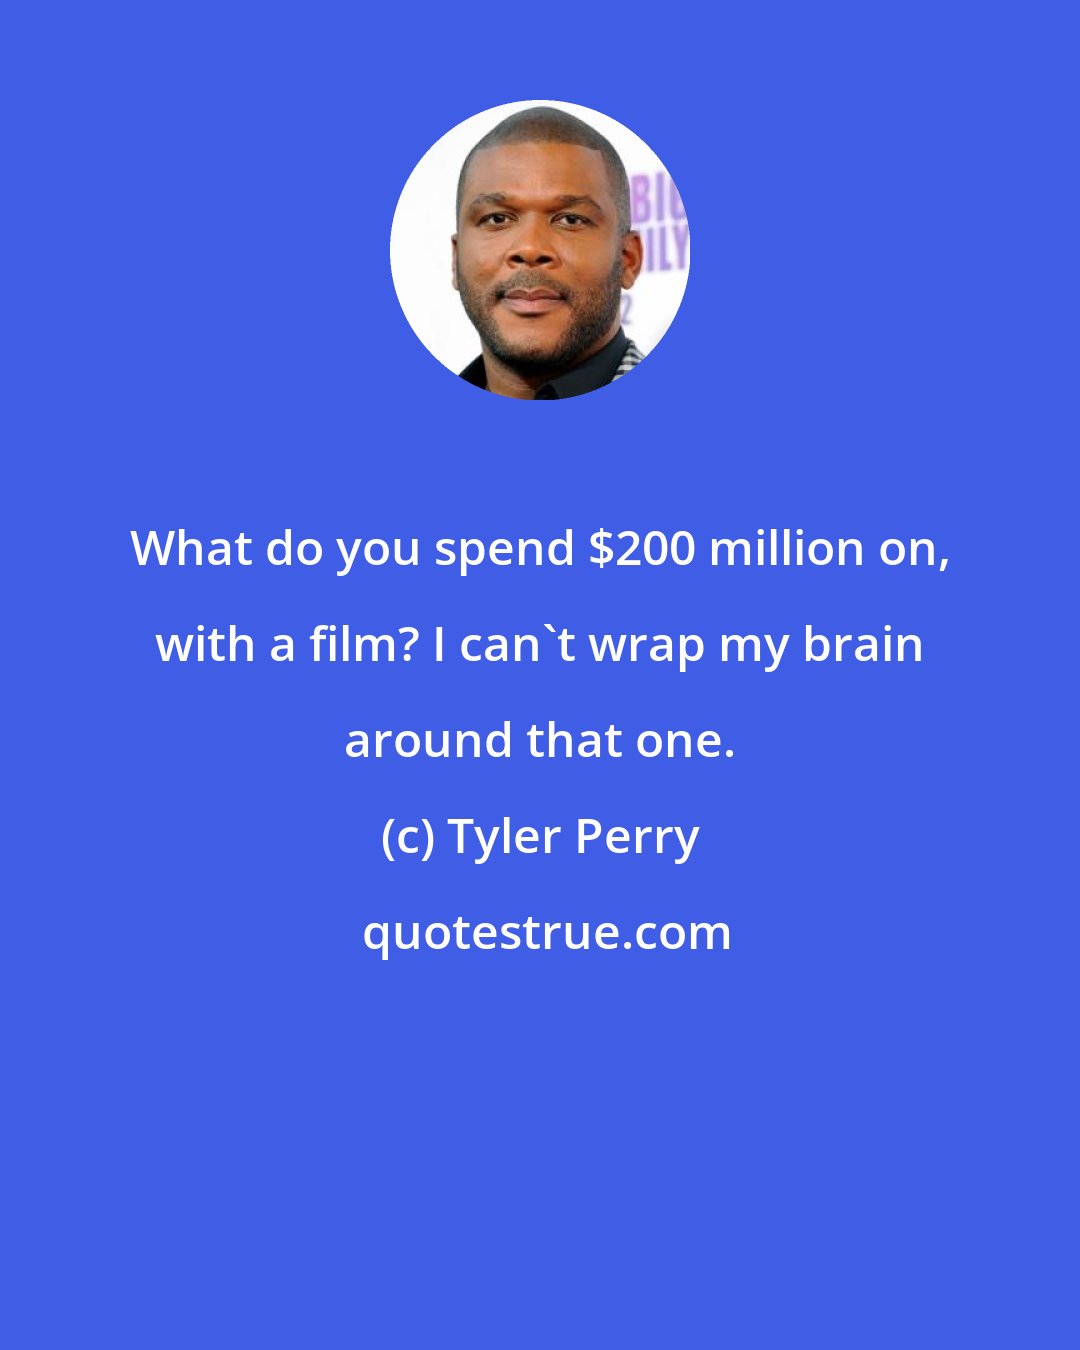 Tyler Perry: What do you spend $200 million on, with a film? I can't wrap my brain around that one.